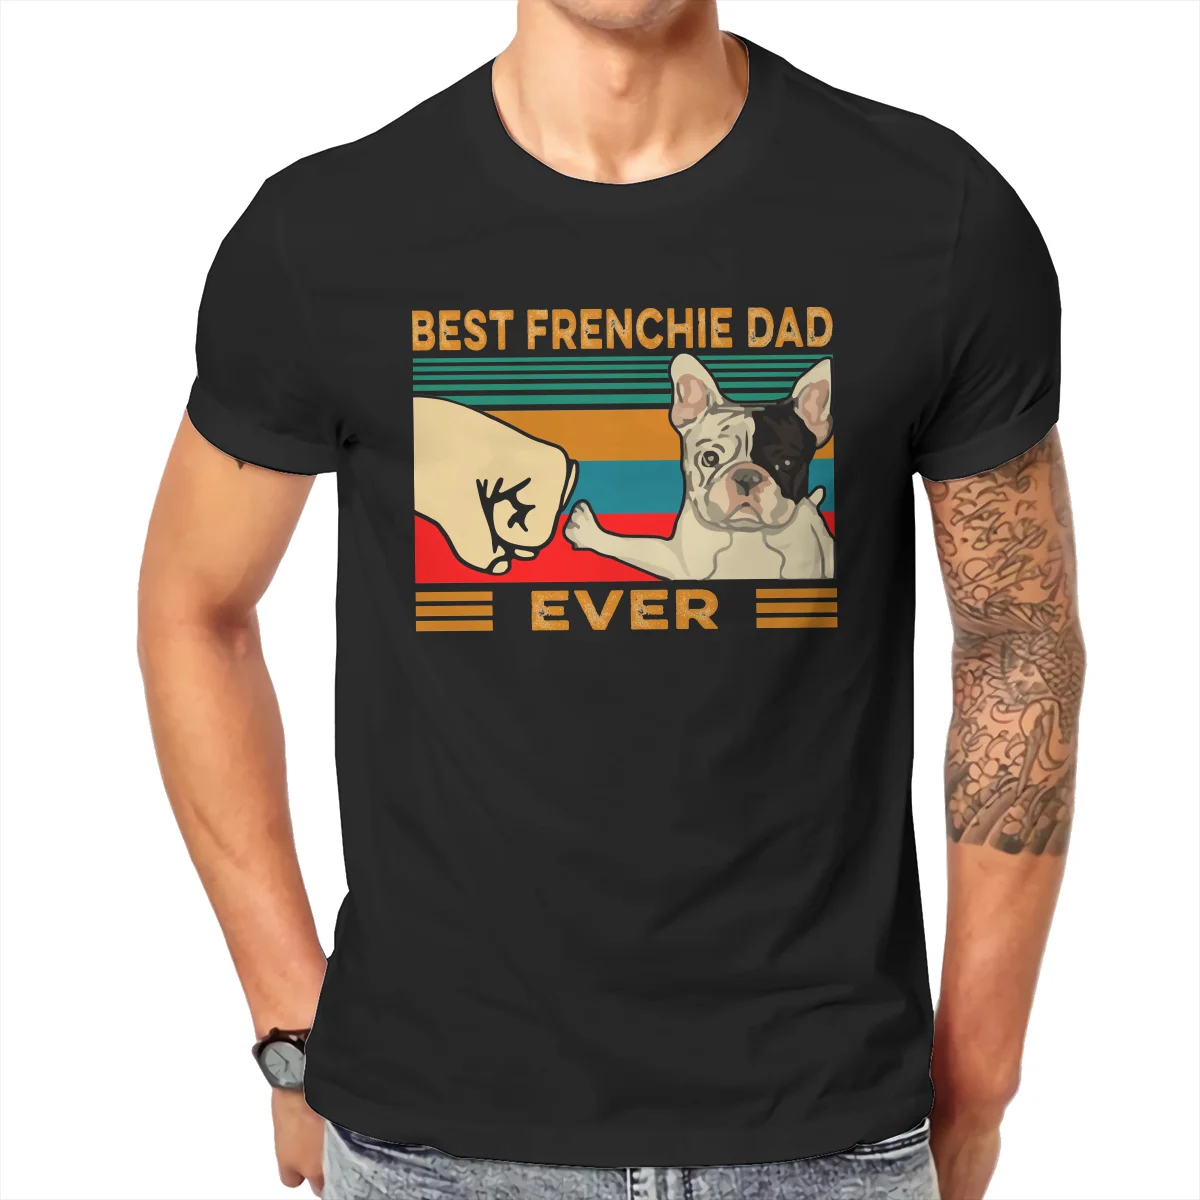 Best Frenchie Dad Ever Men TShirt French Bulldog Pet Dog Lover O Neck Tops Fabric T Shirt Humor Top Quality Gift Idea